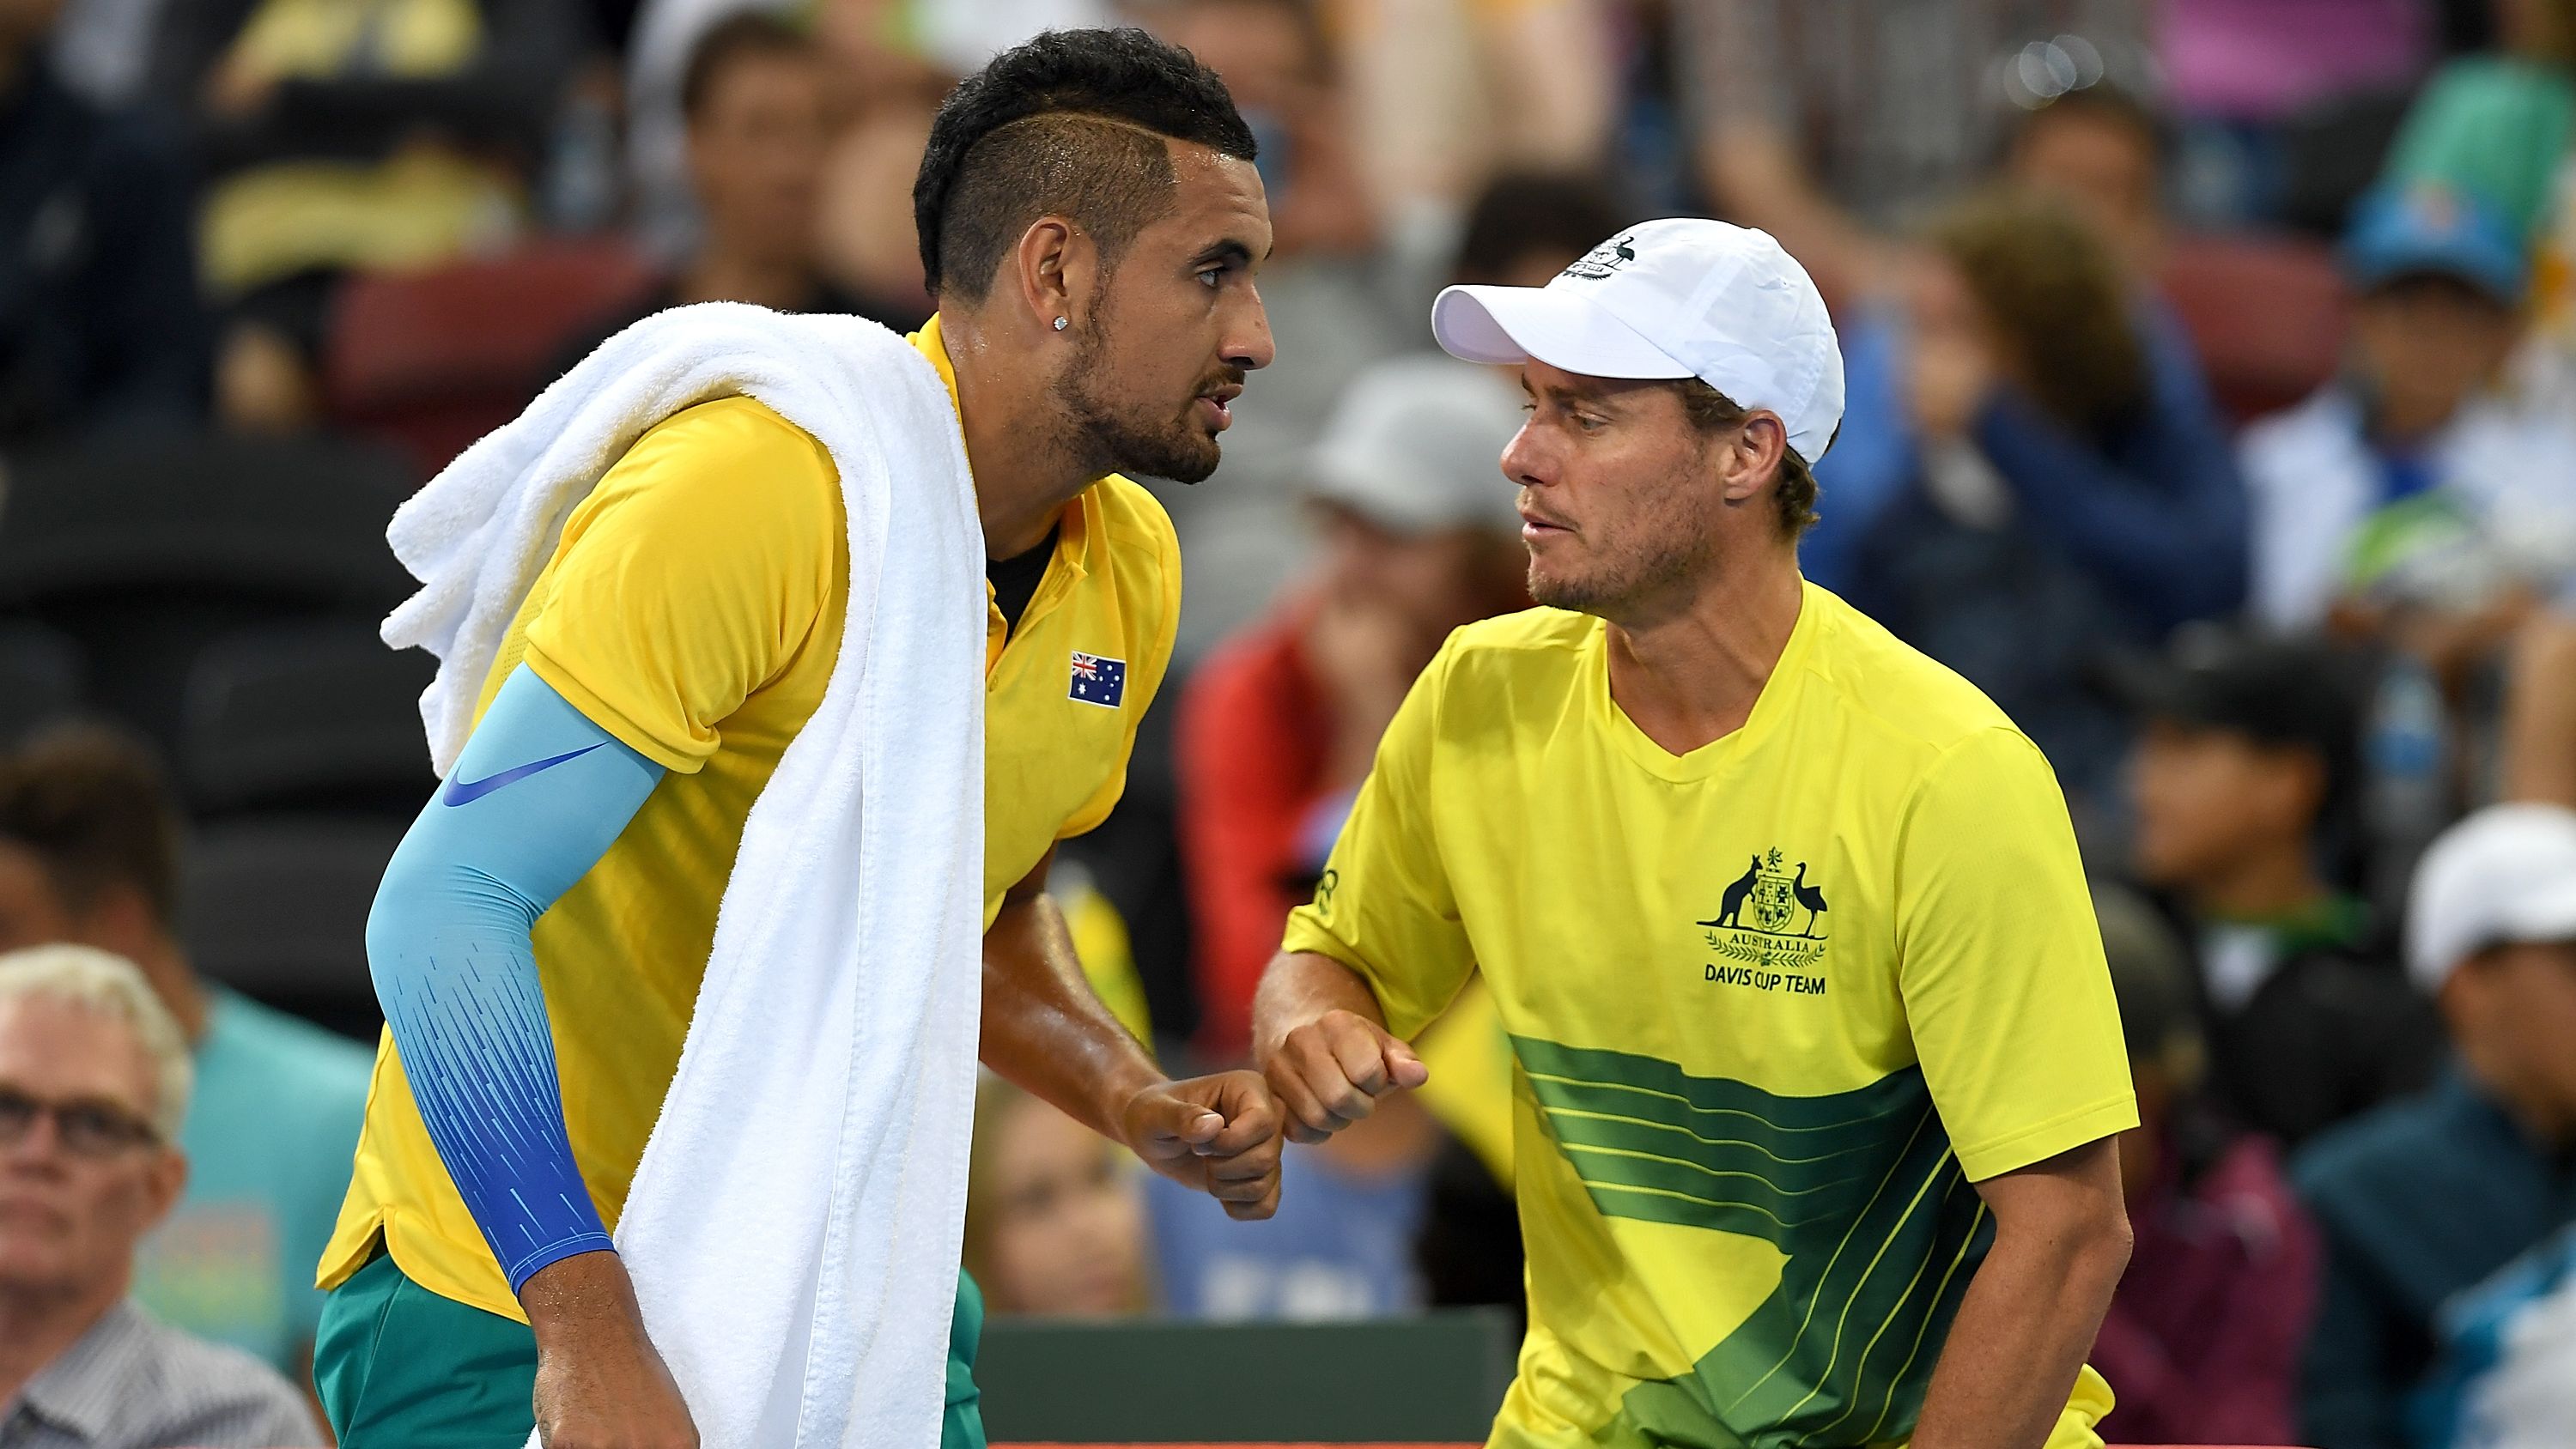 Davis Cup Qualifier Australia vs Hungary Ultimate Guide: Lleyton Hewitt discusses Kyrgios shaped hole in Aussie team